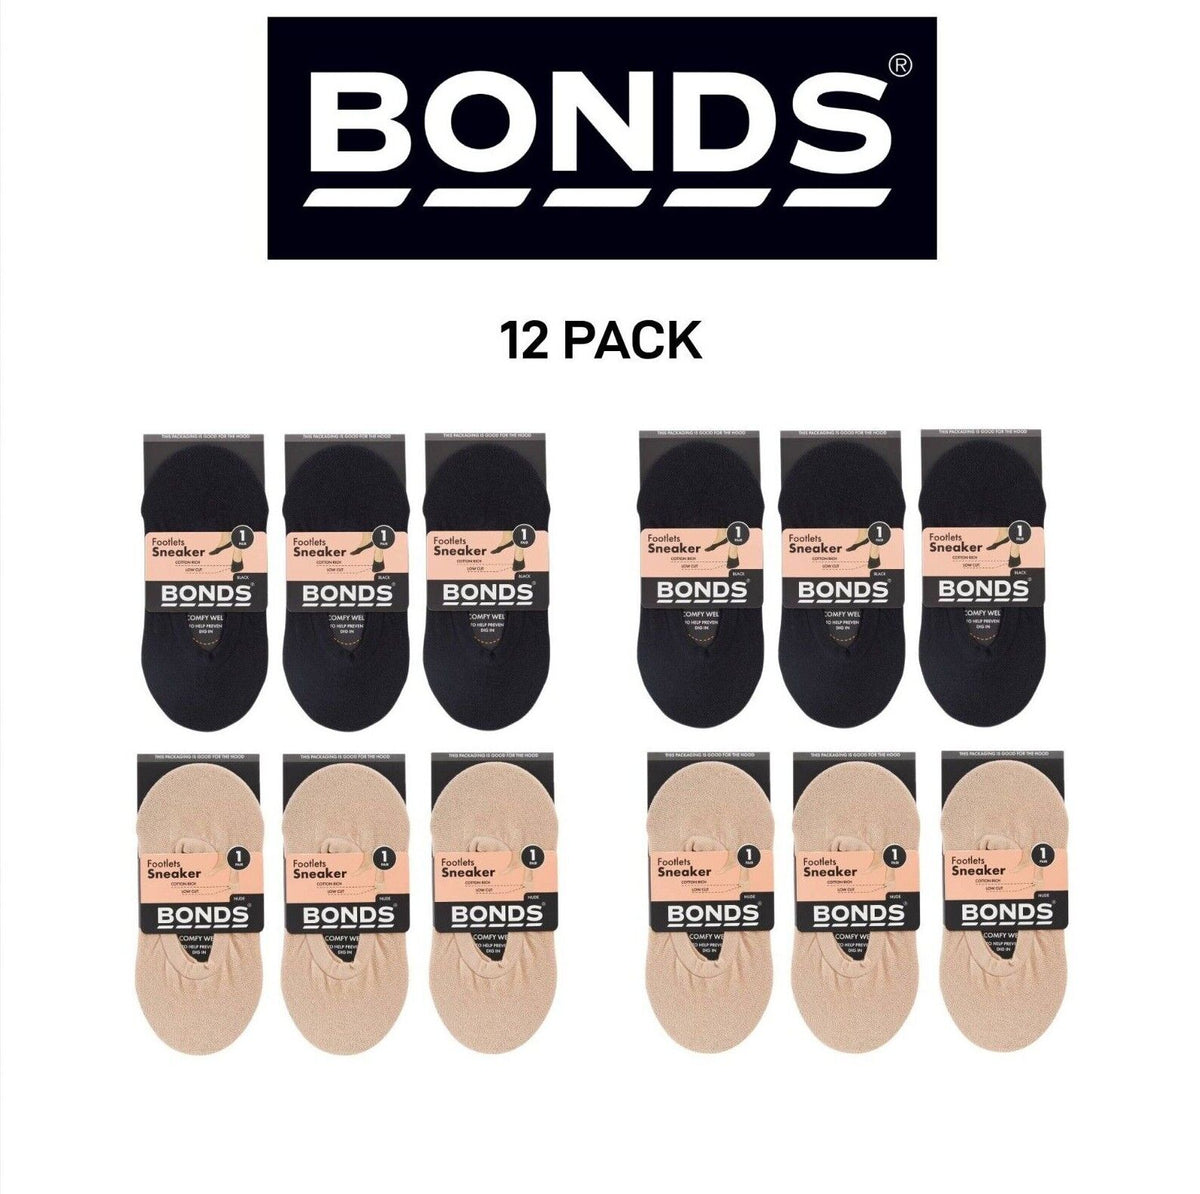 Bonds Womens No Show Footlets Cotton Rich Stocking Socks Seamless 12 Pack L7344W